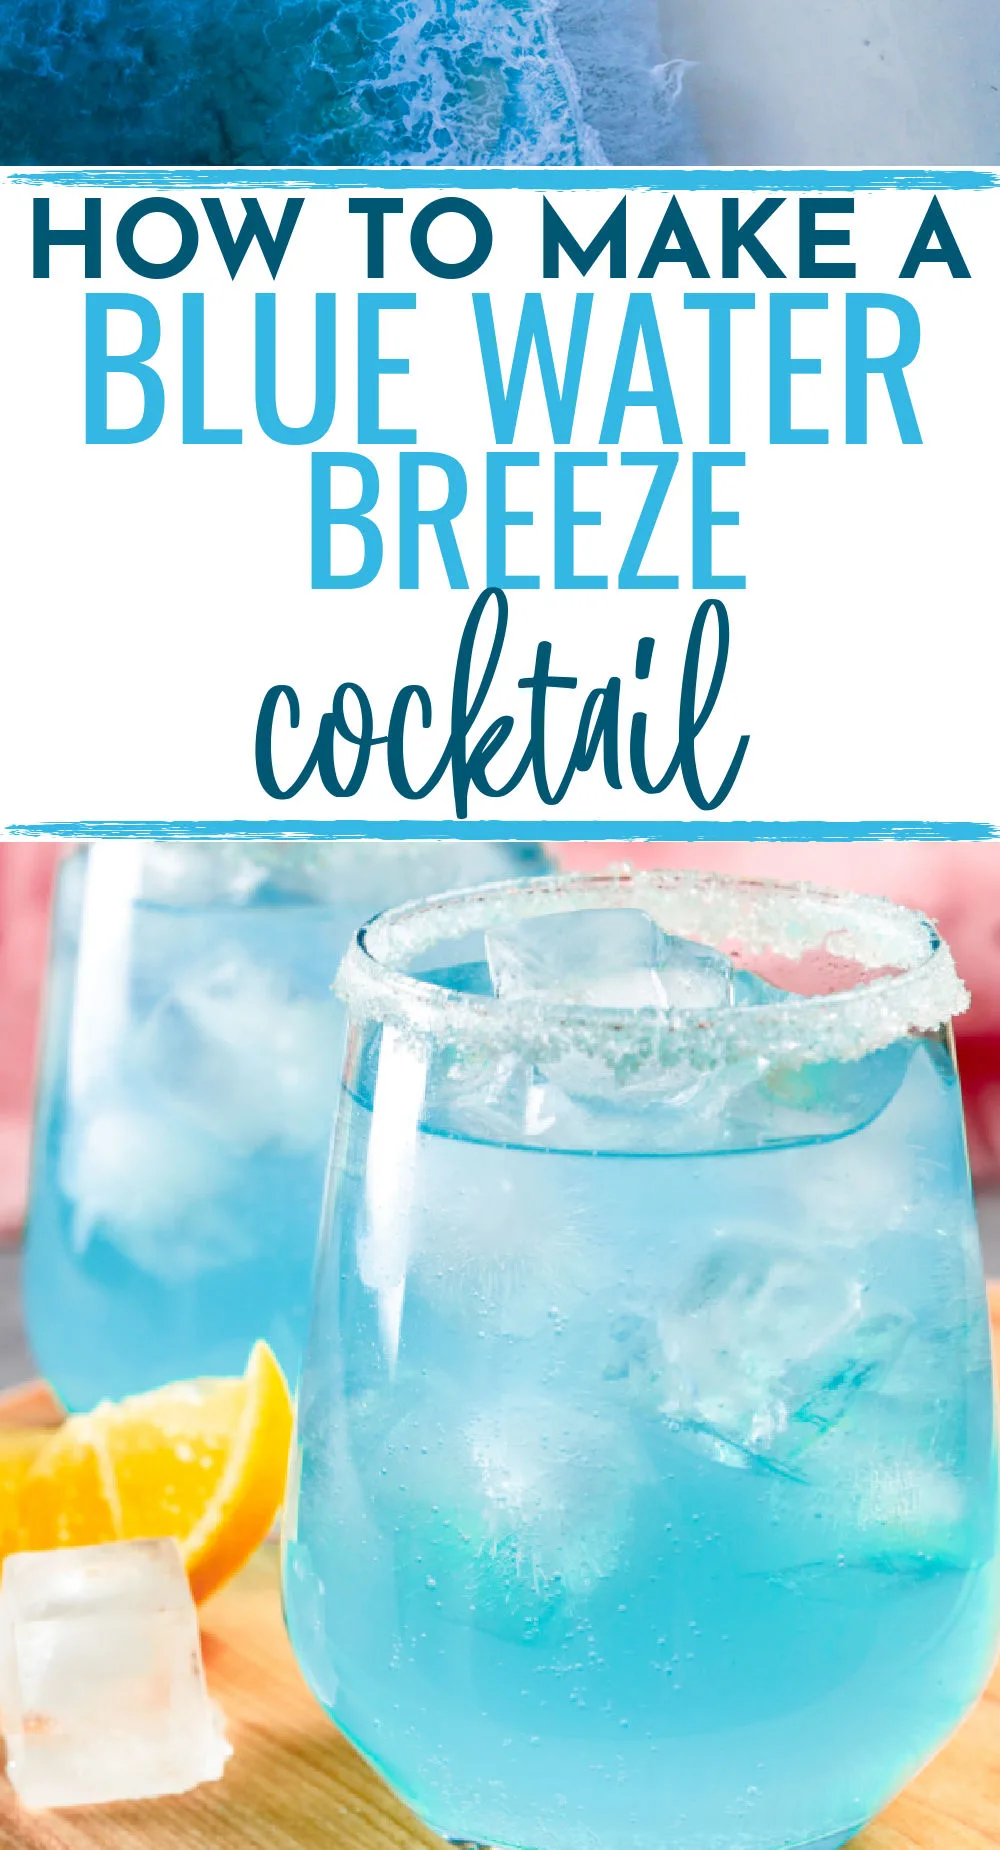 How to make an ocean breeze cocktail